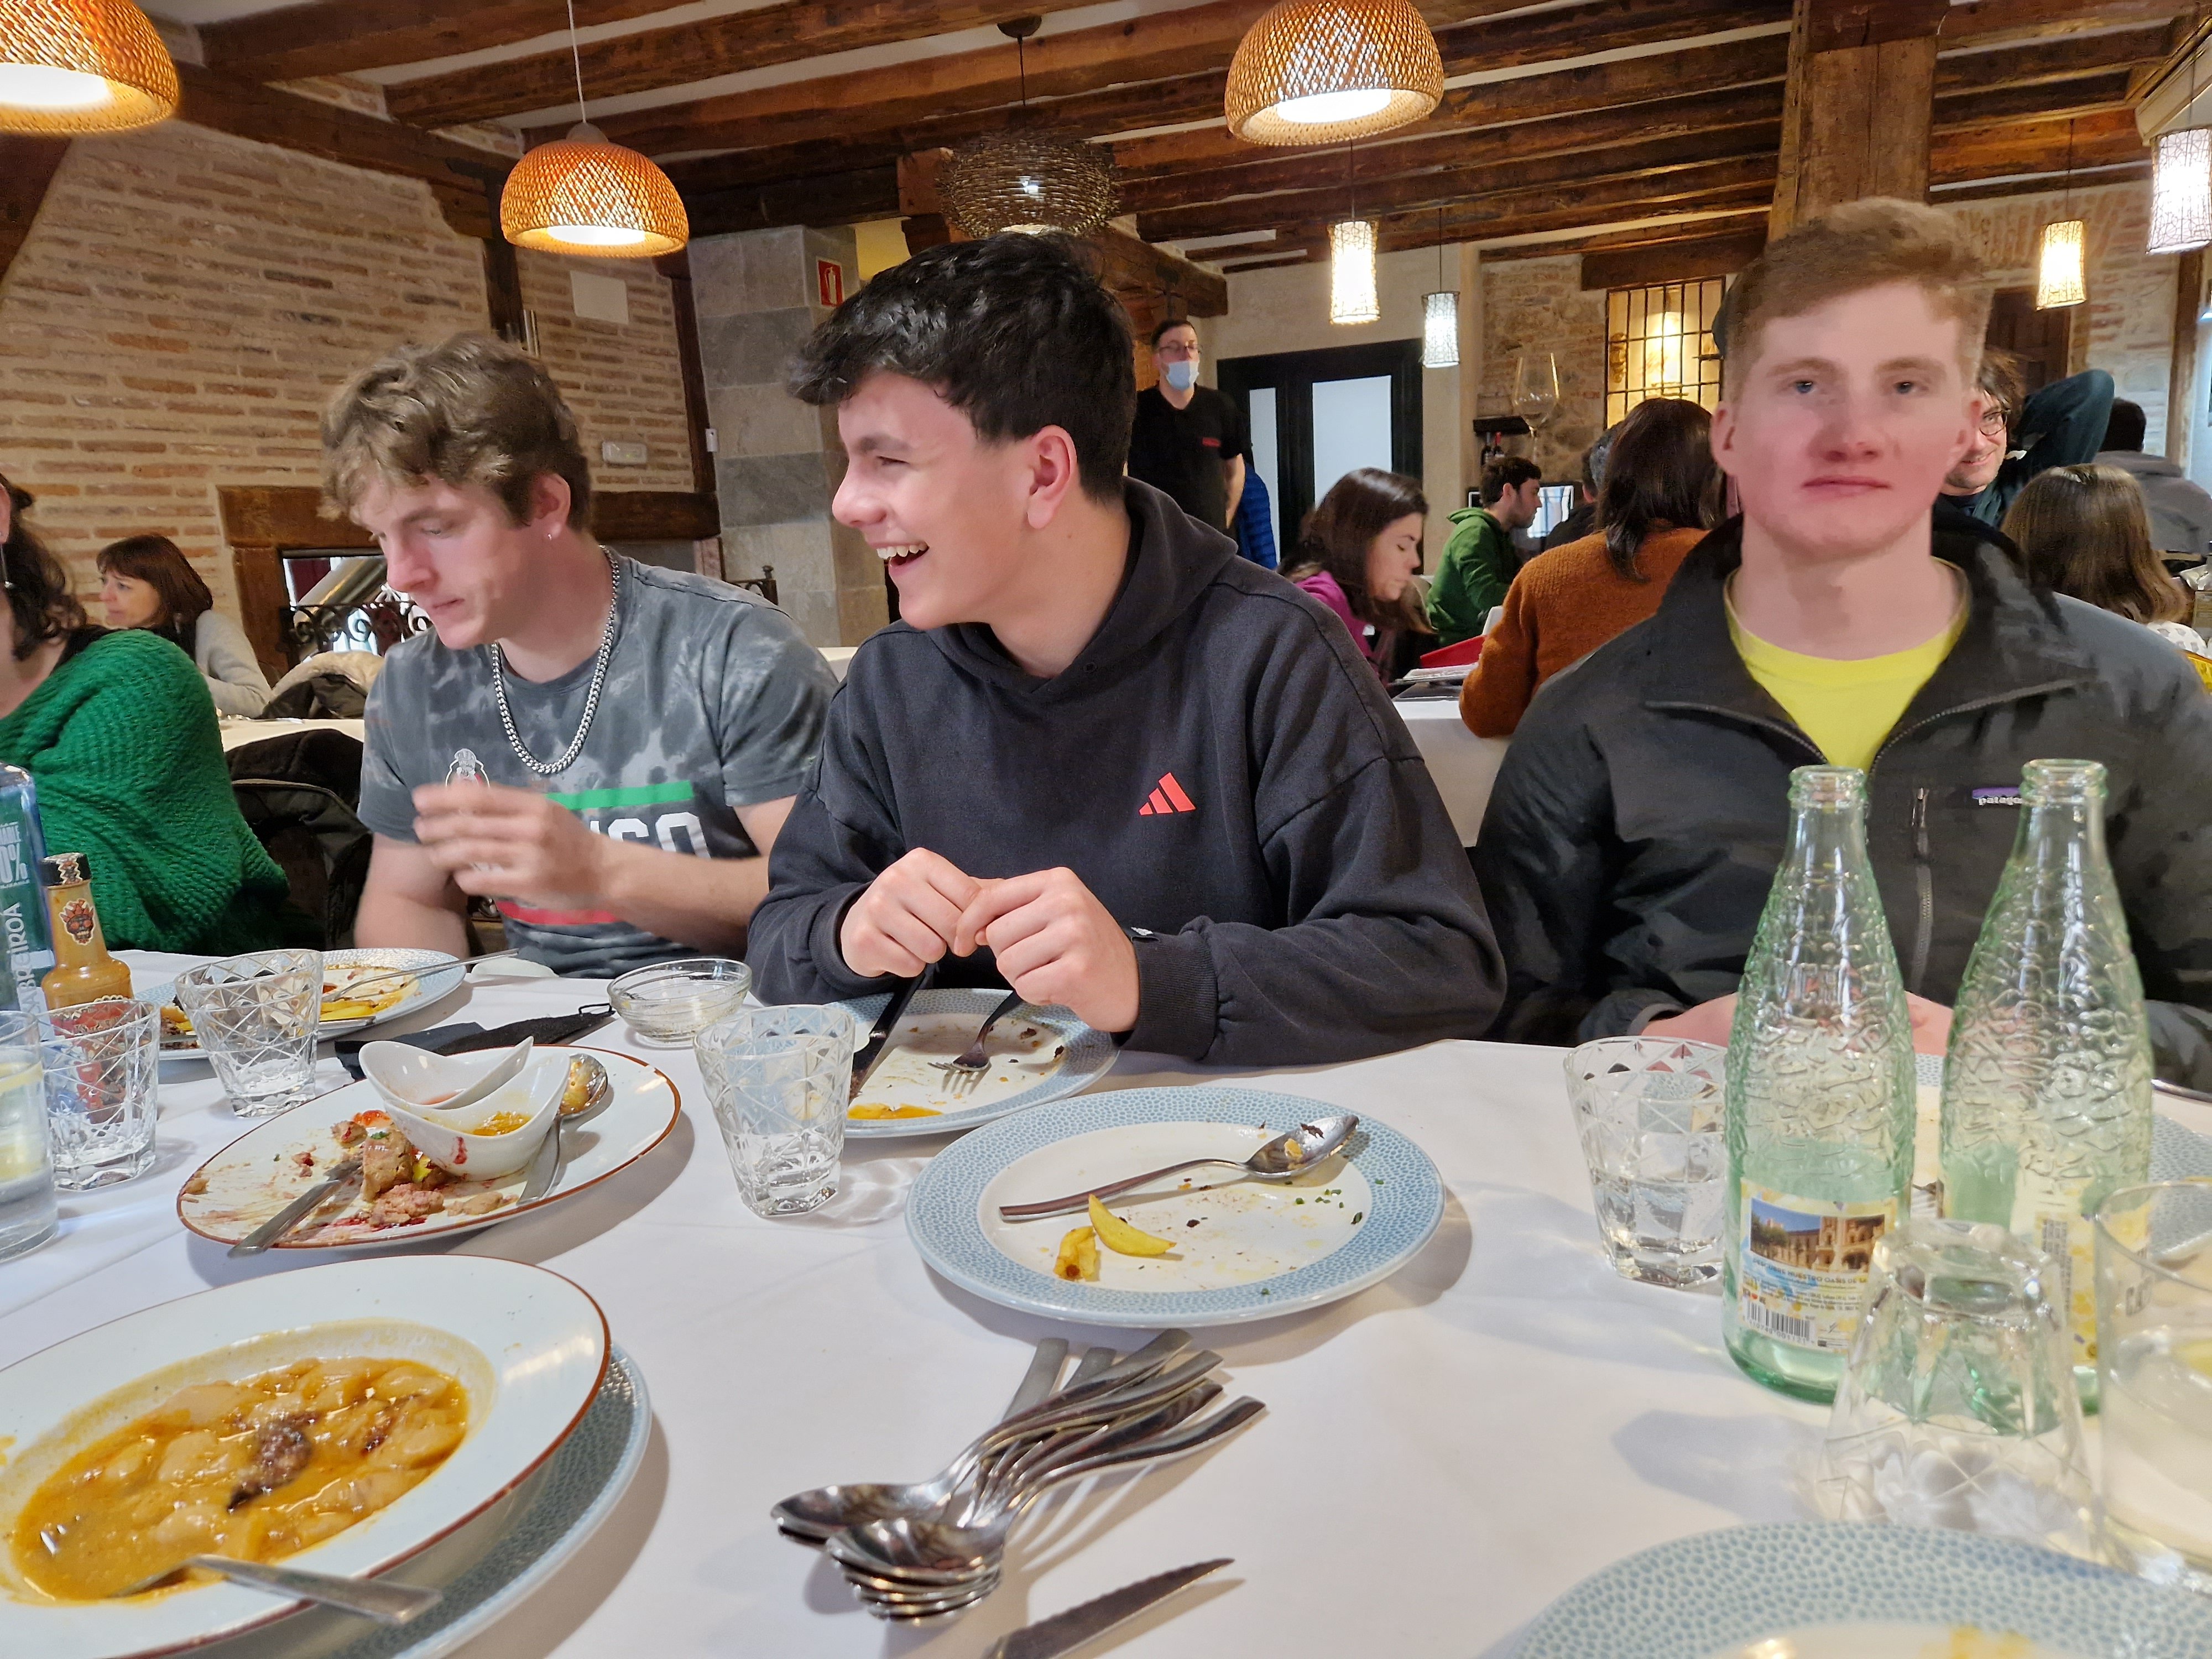 Proctor en Segovia learns about Spanish food culture